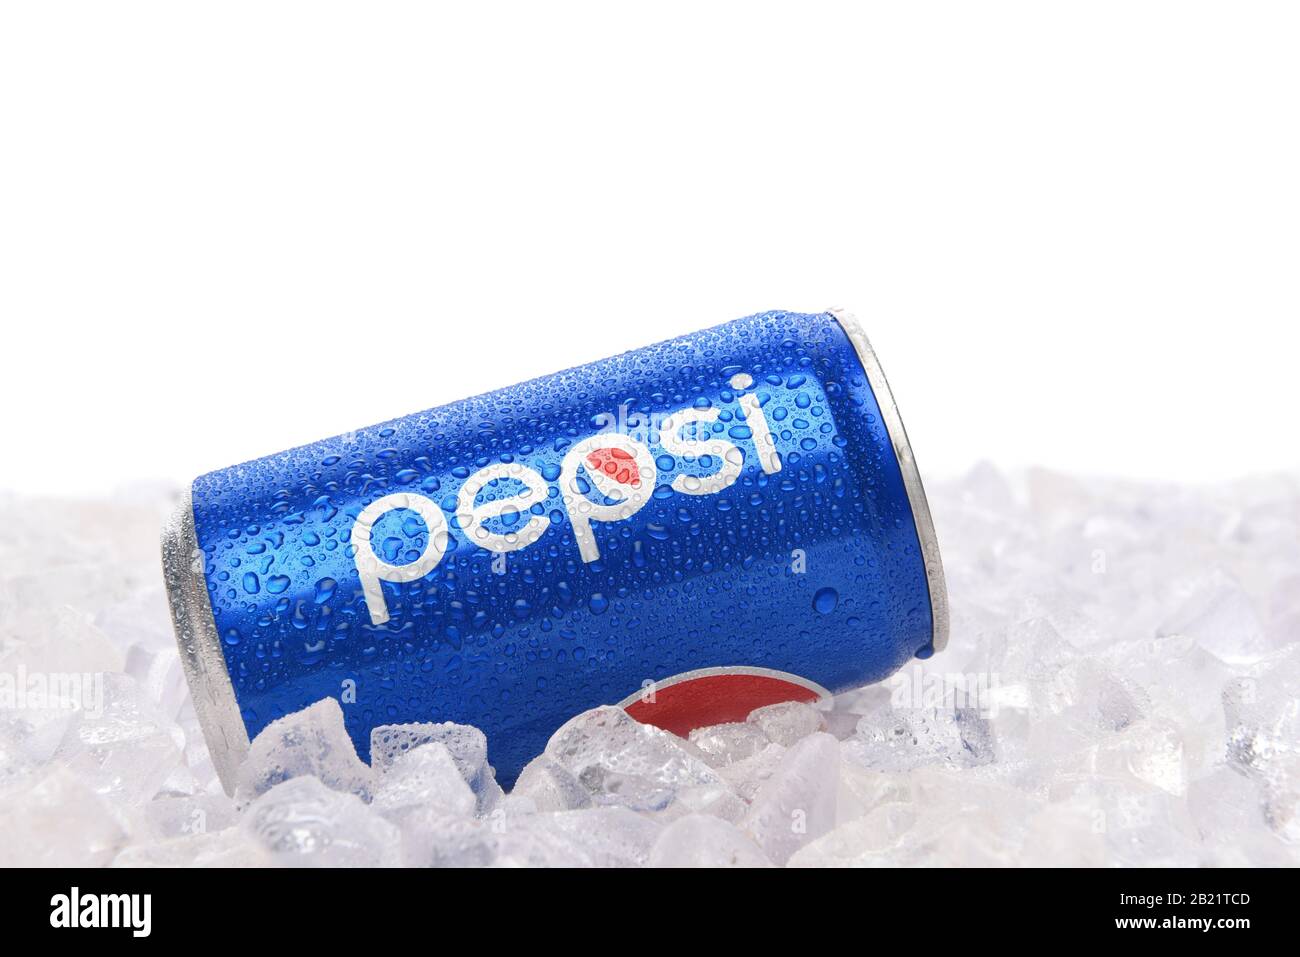 IRVINE, CALIFORNIA - JUNE 28, 2019: A 7.5 ounce cans of Pepsi Cola in ice with white background. Stock Photo